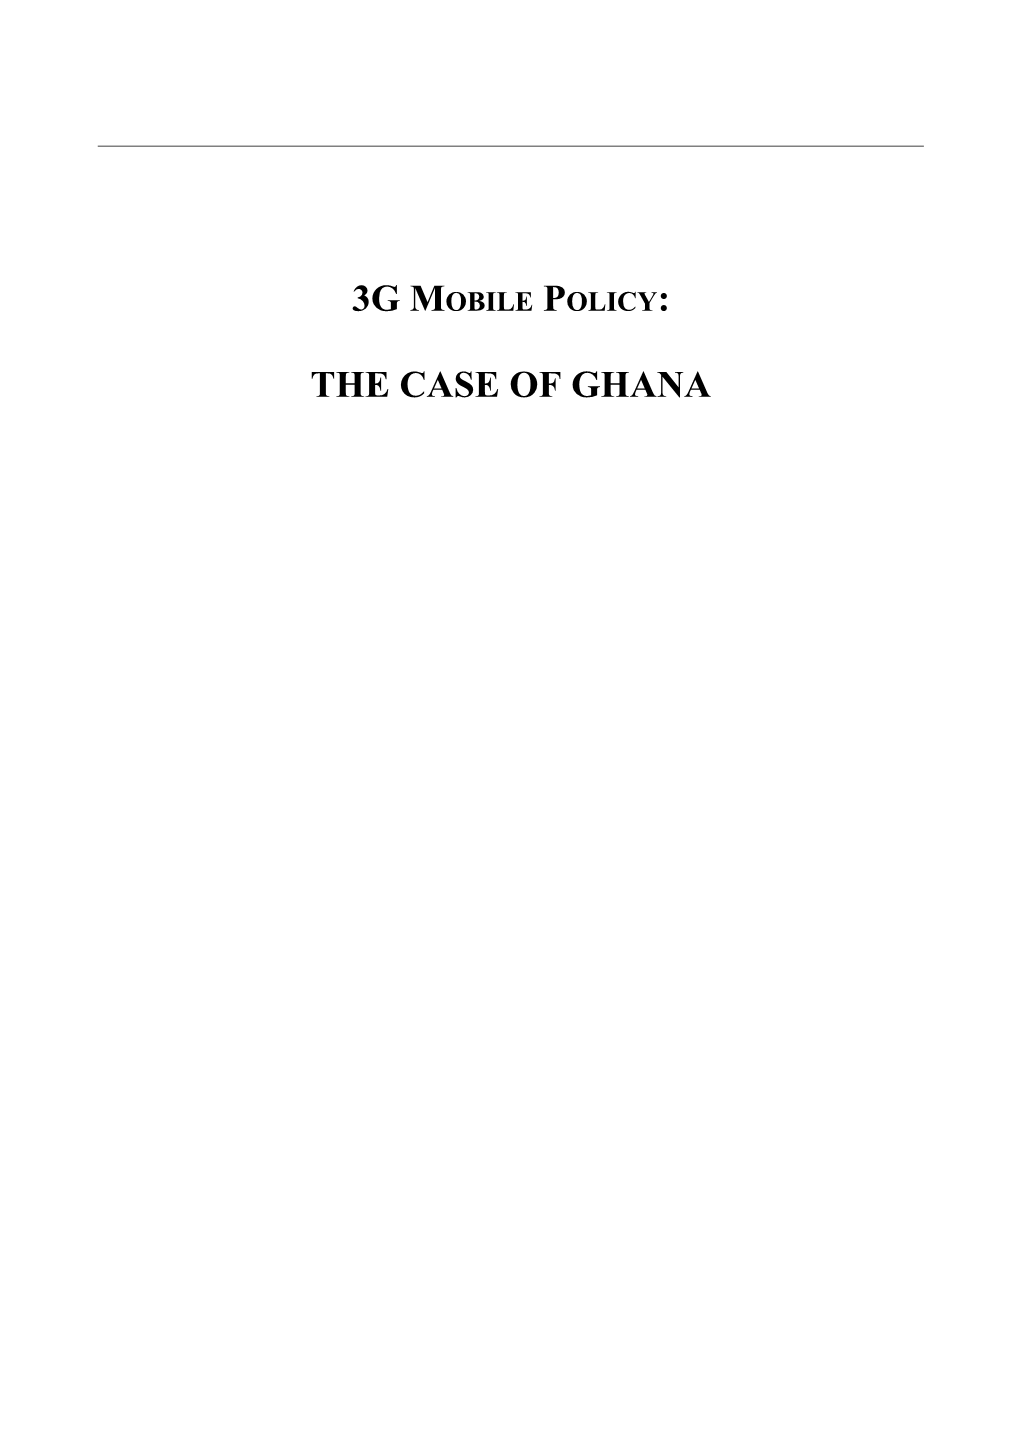 3G Mobile Policy: the Case of Ghana